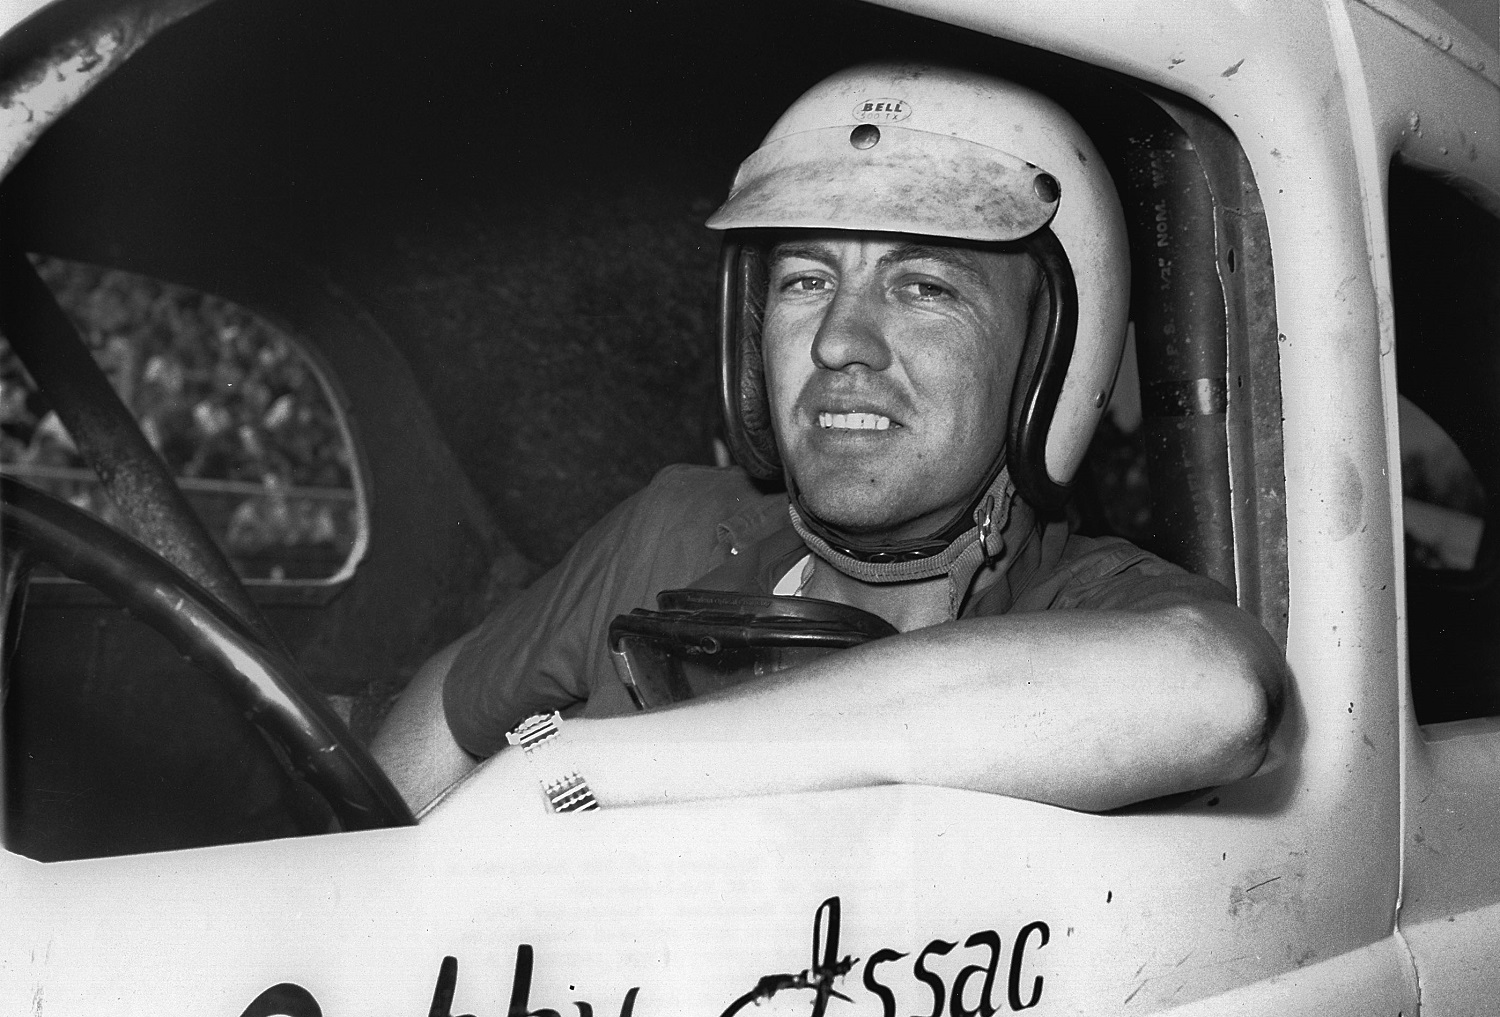 Bobby Isaac ran the Modified stock car circuits of the Southeastern United States for several years before making the move to NASCAR Cup racing in 1961.